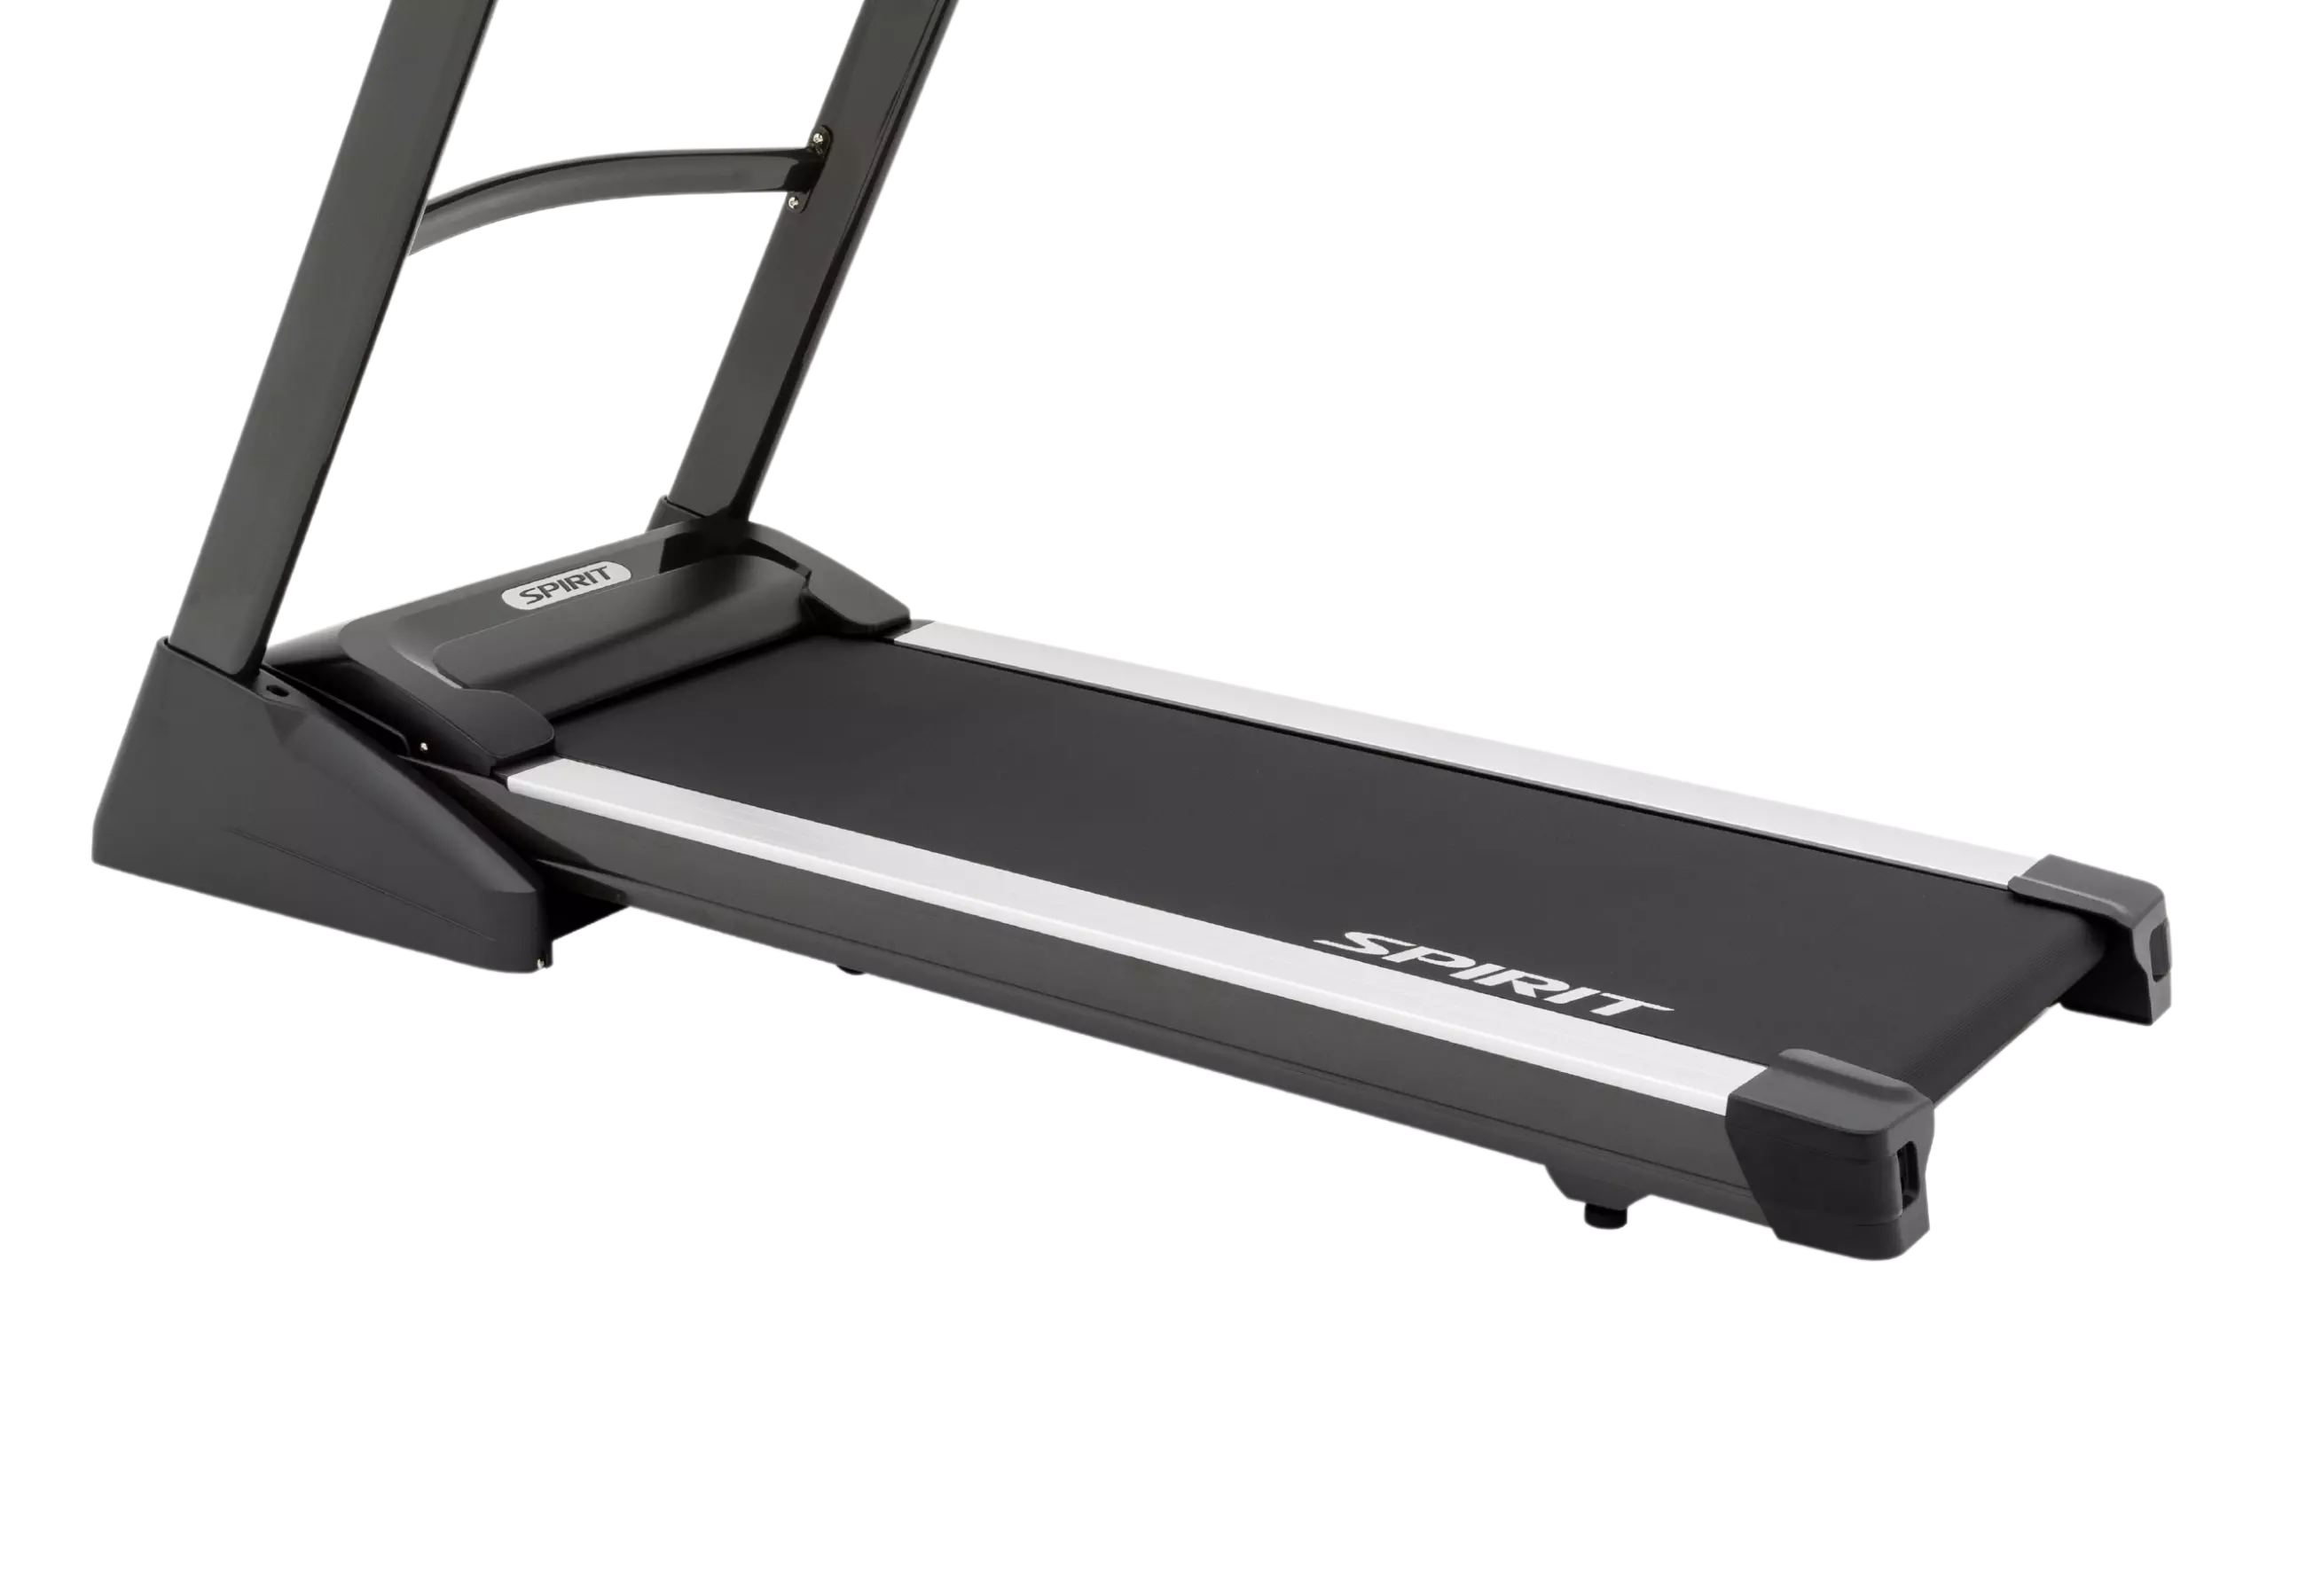 A treadmill made by spirit is shown on a white background